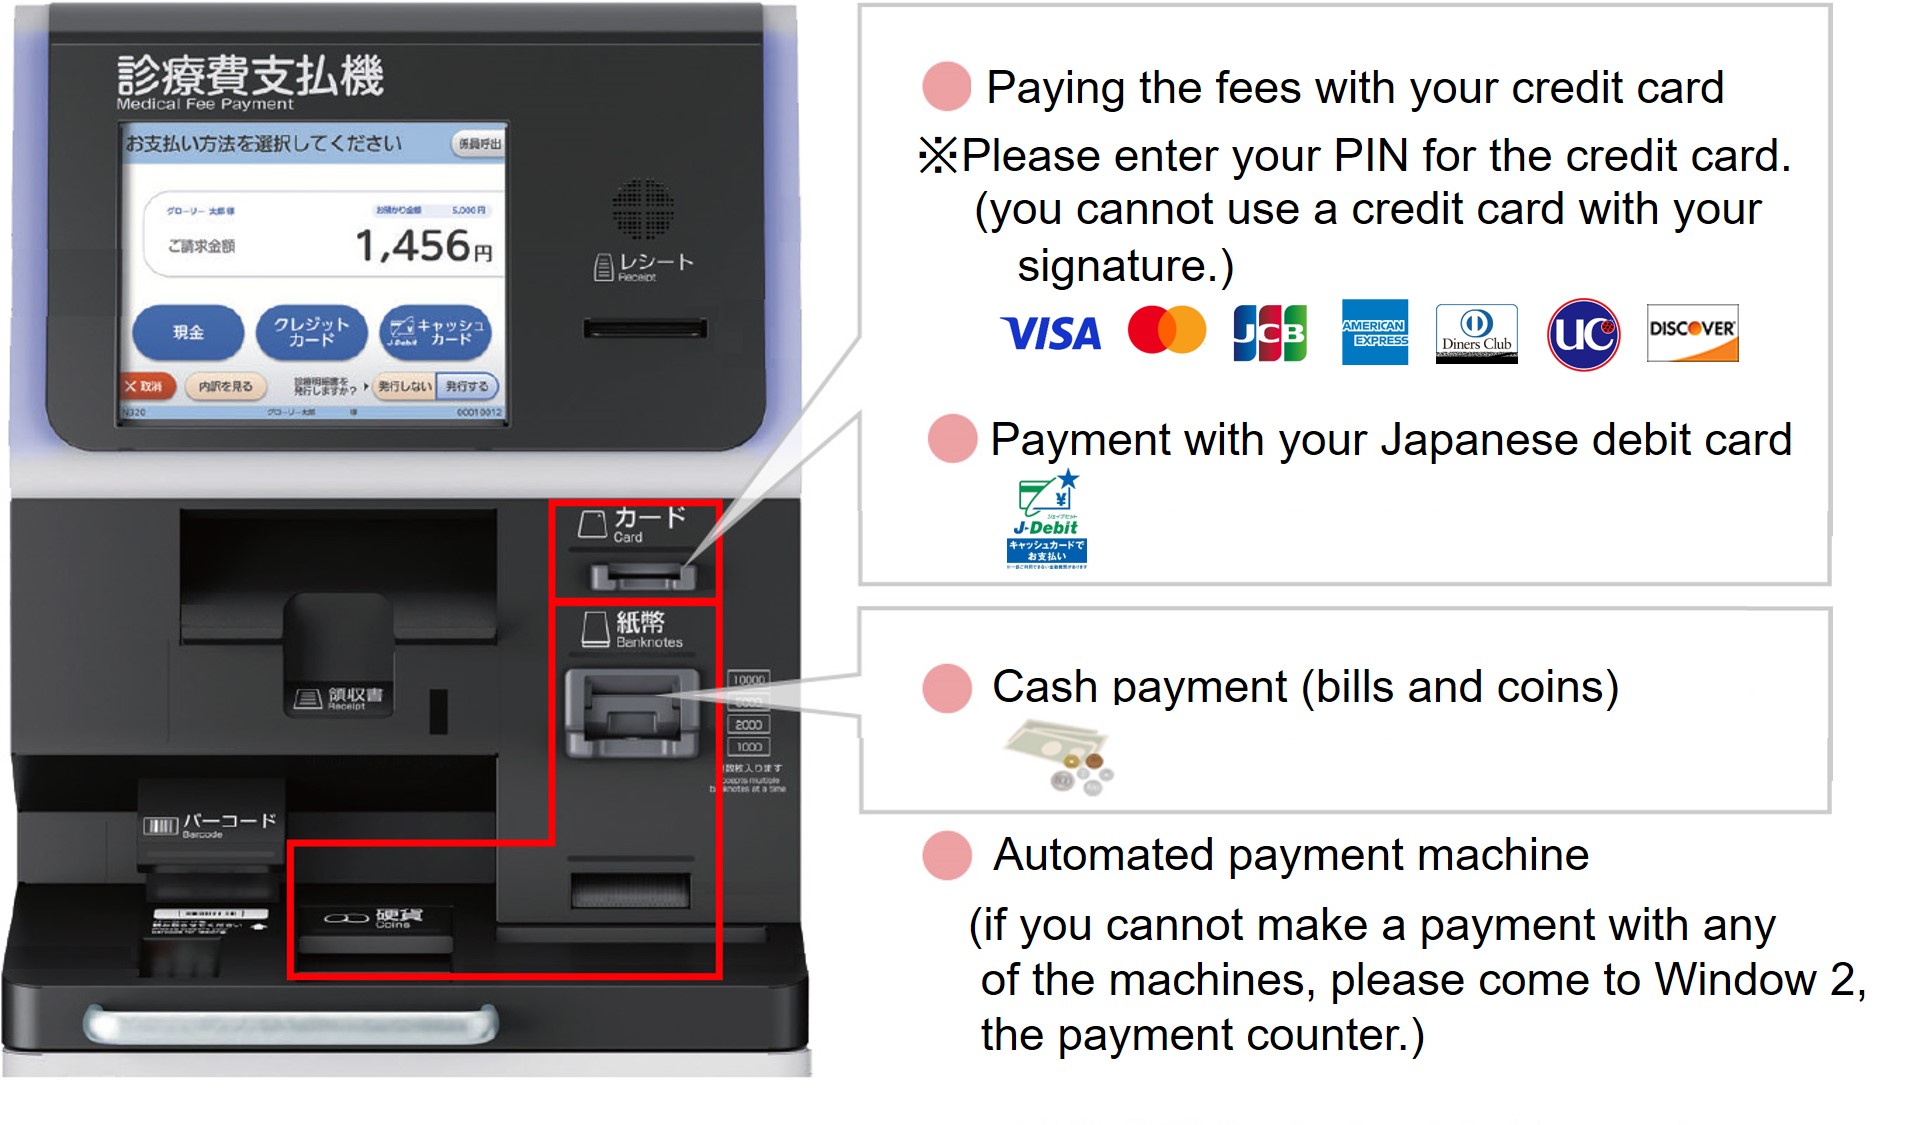 Making payment with an automated payment machine (Area 3)